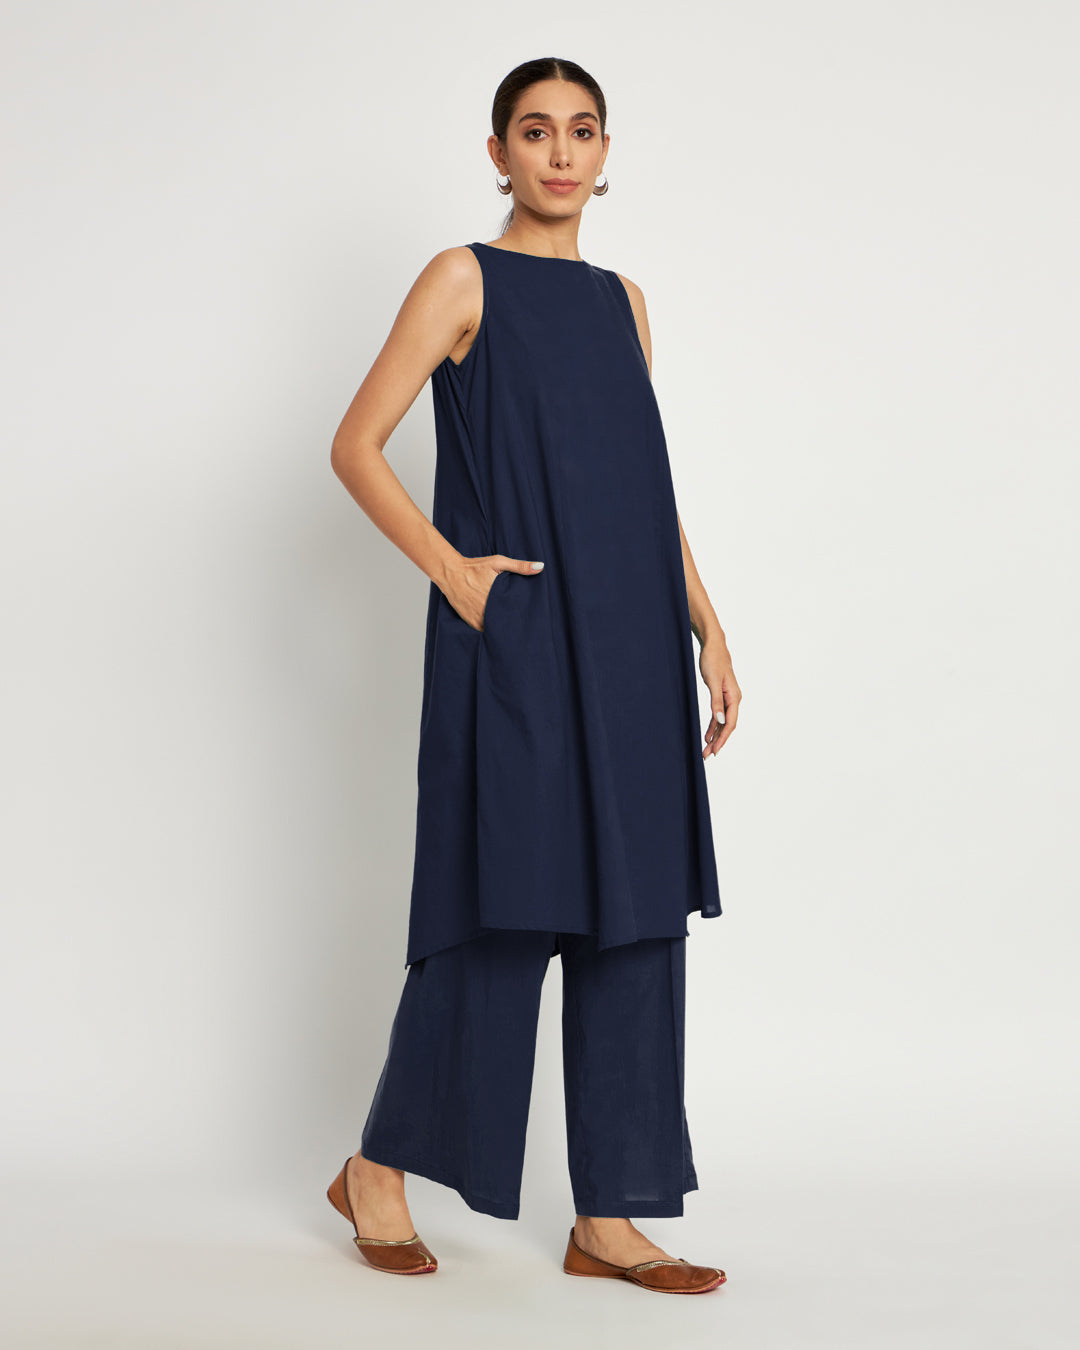 Midnight Blue Sleeveless A-Line Solid Co-ord Set